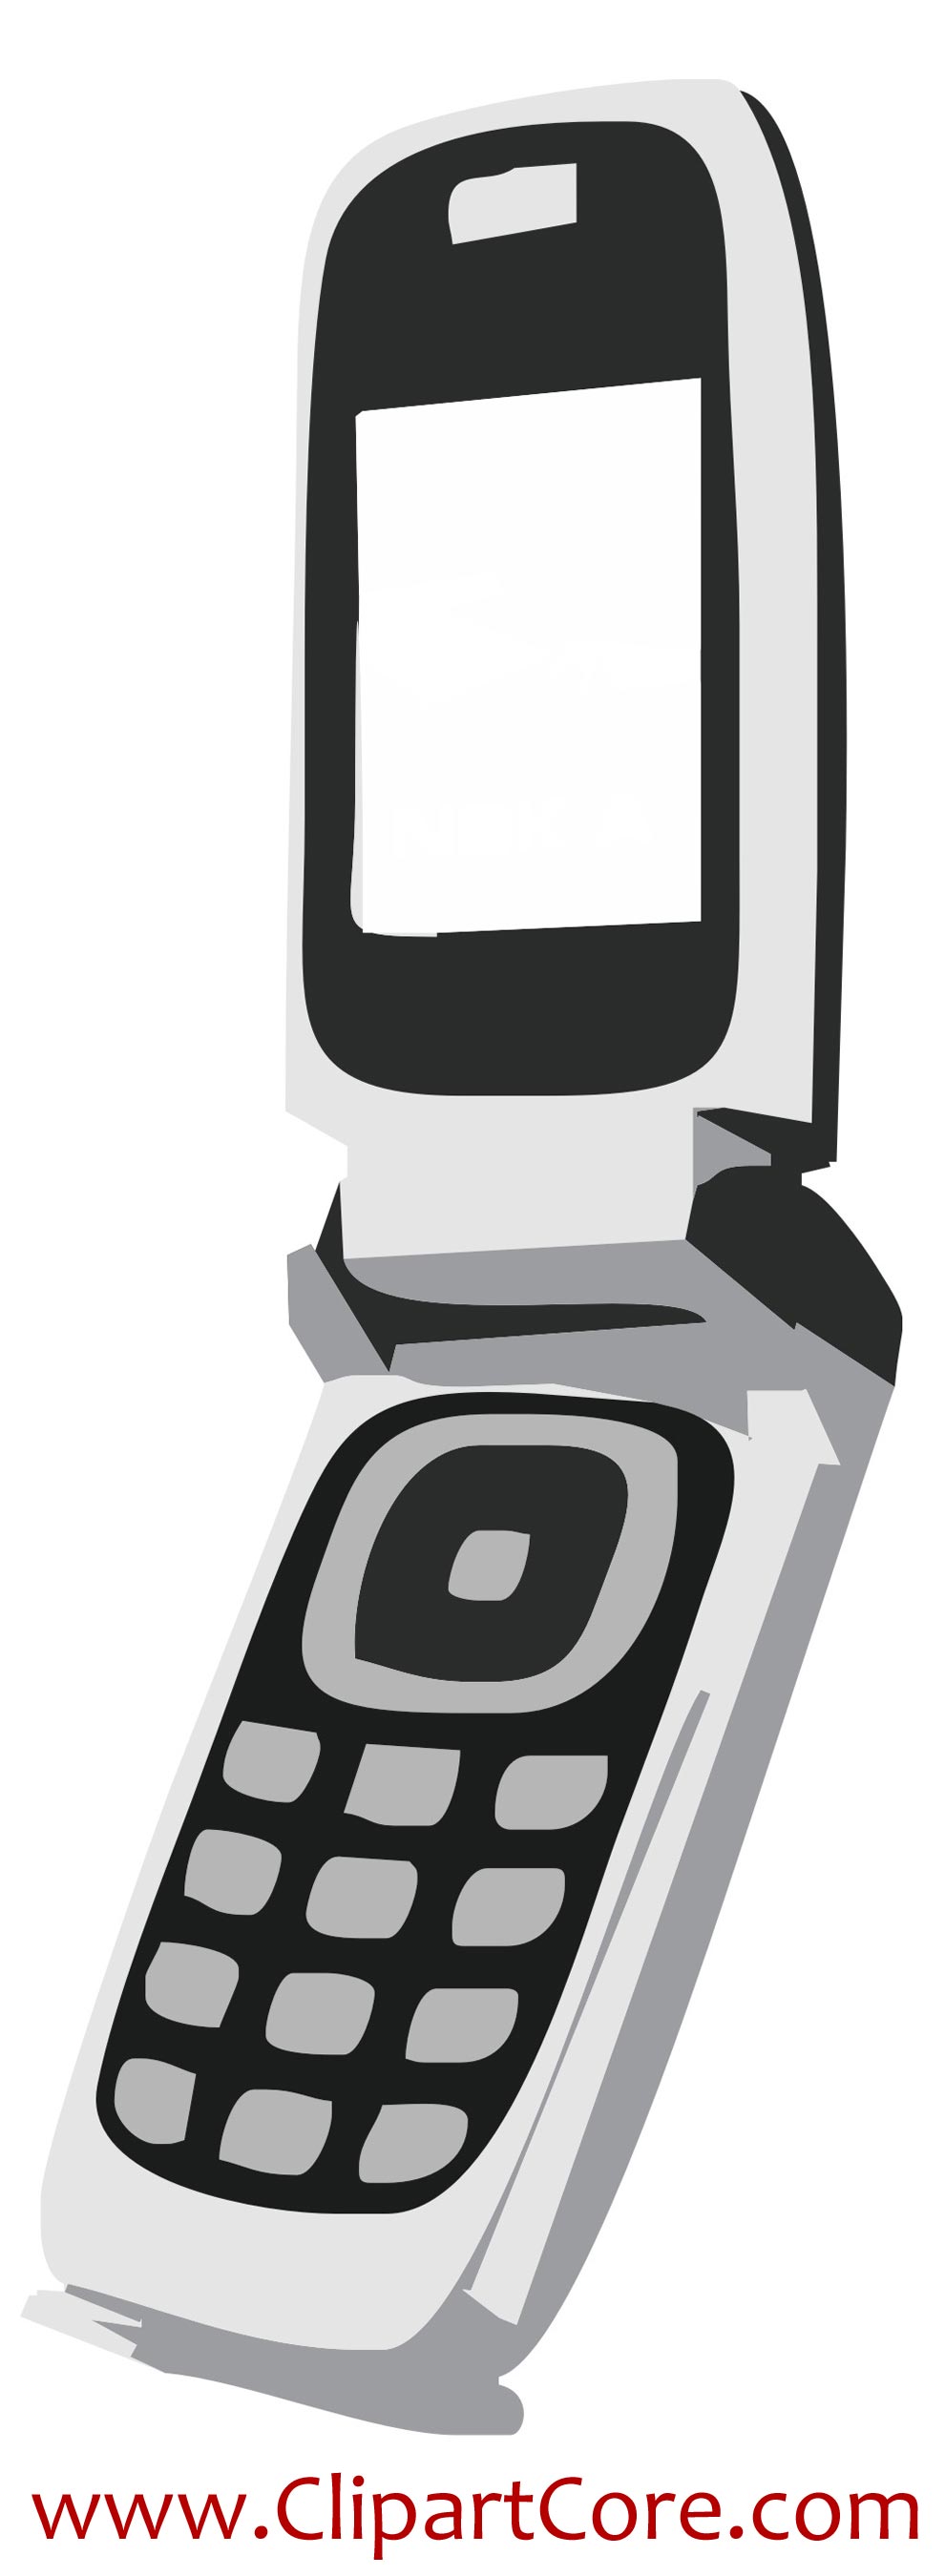 blog archive cell phone . - Clip Art Cell Phone